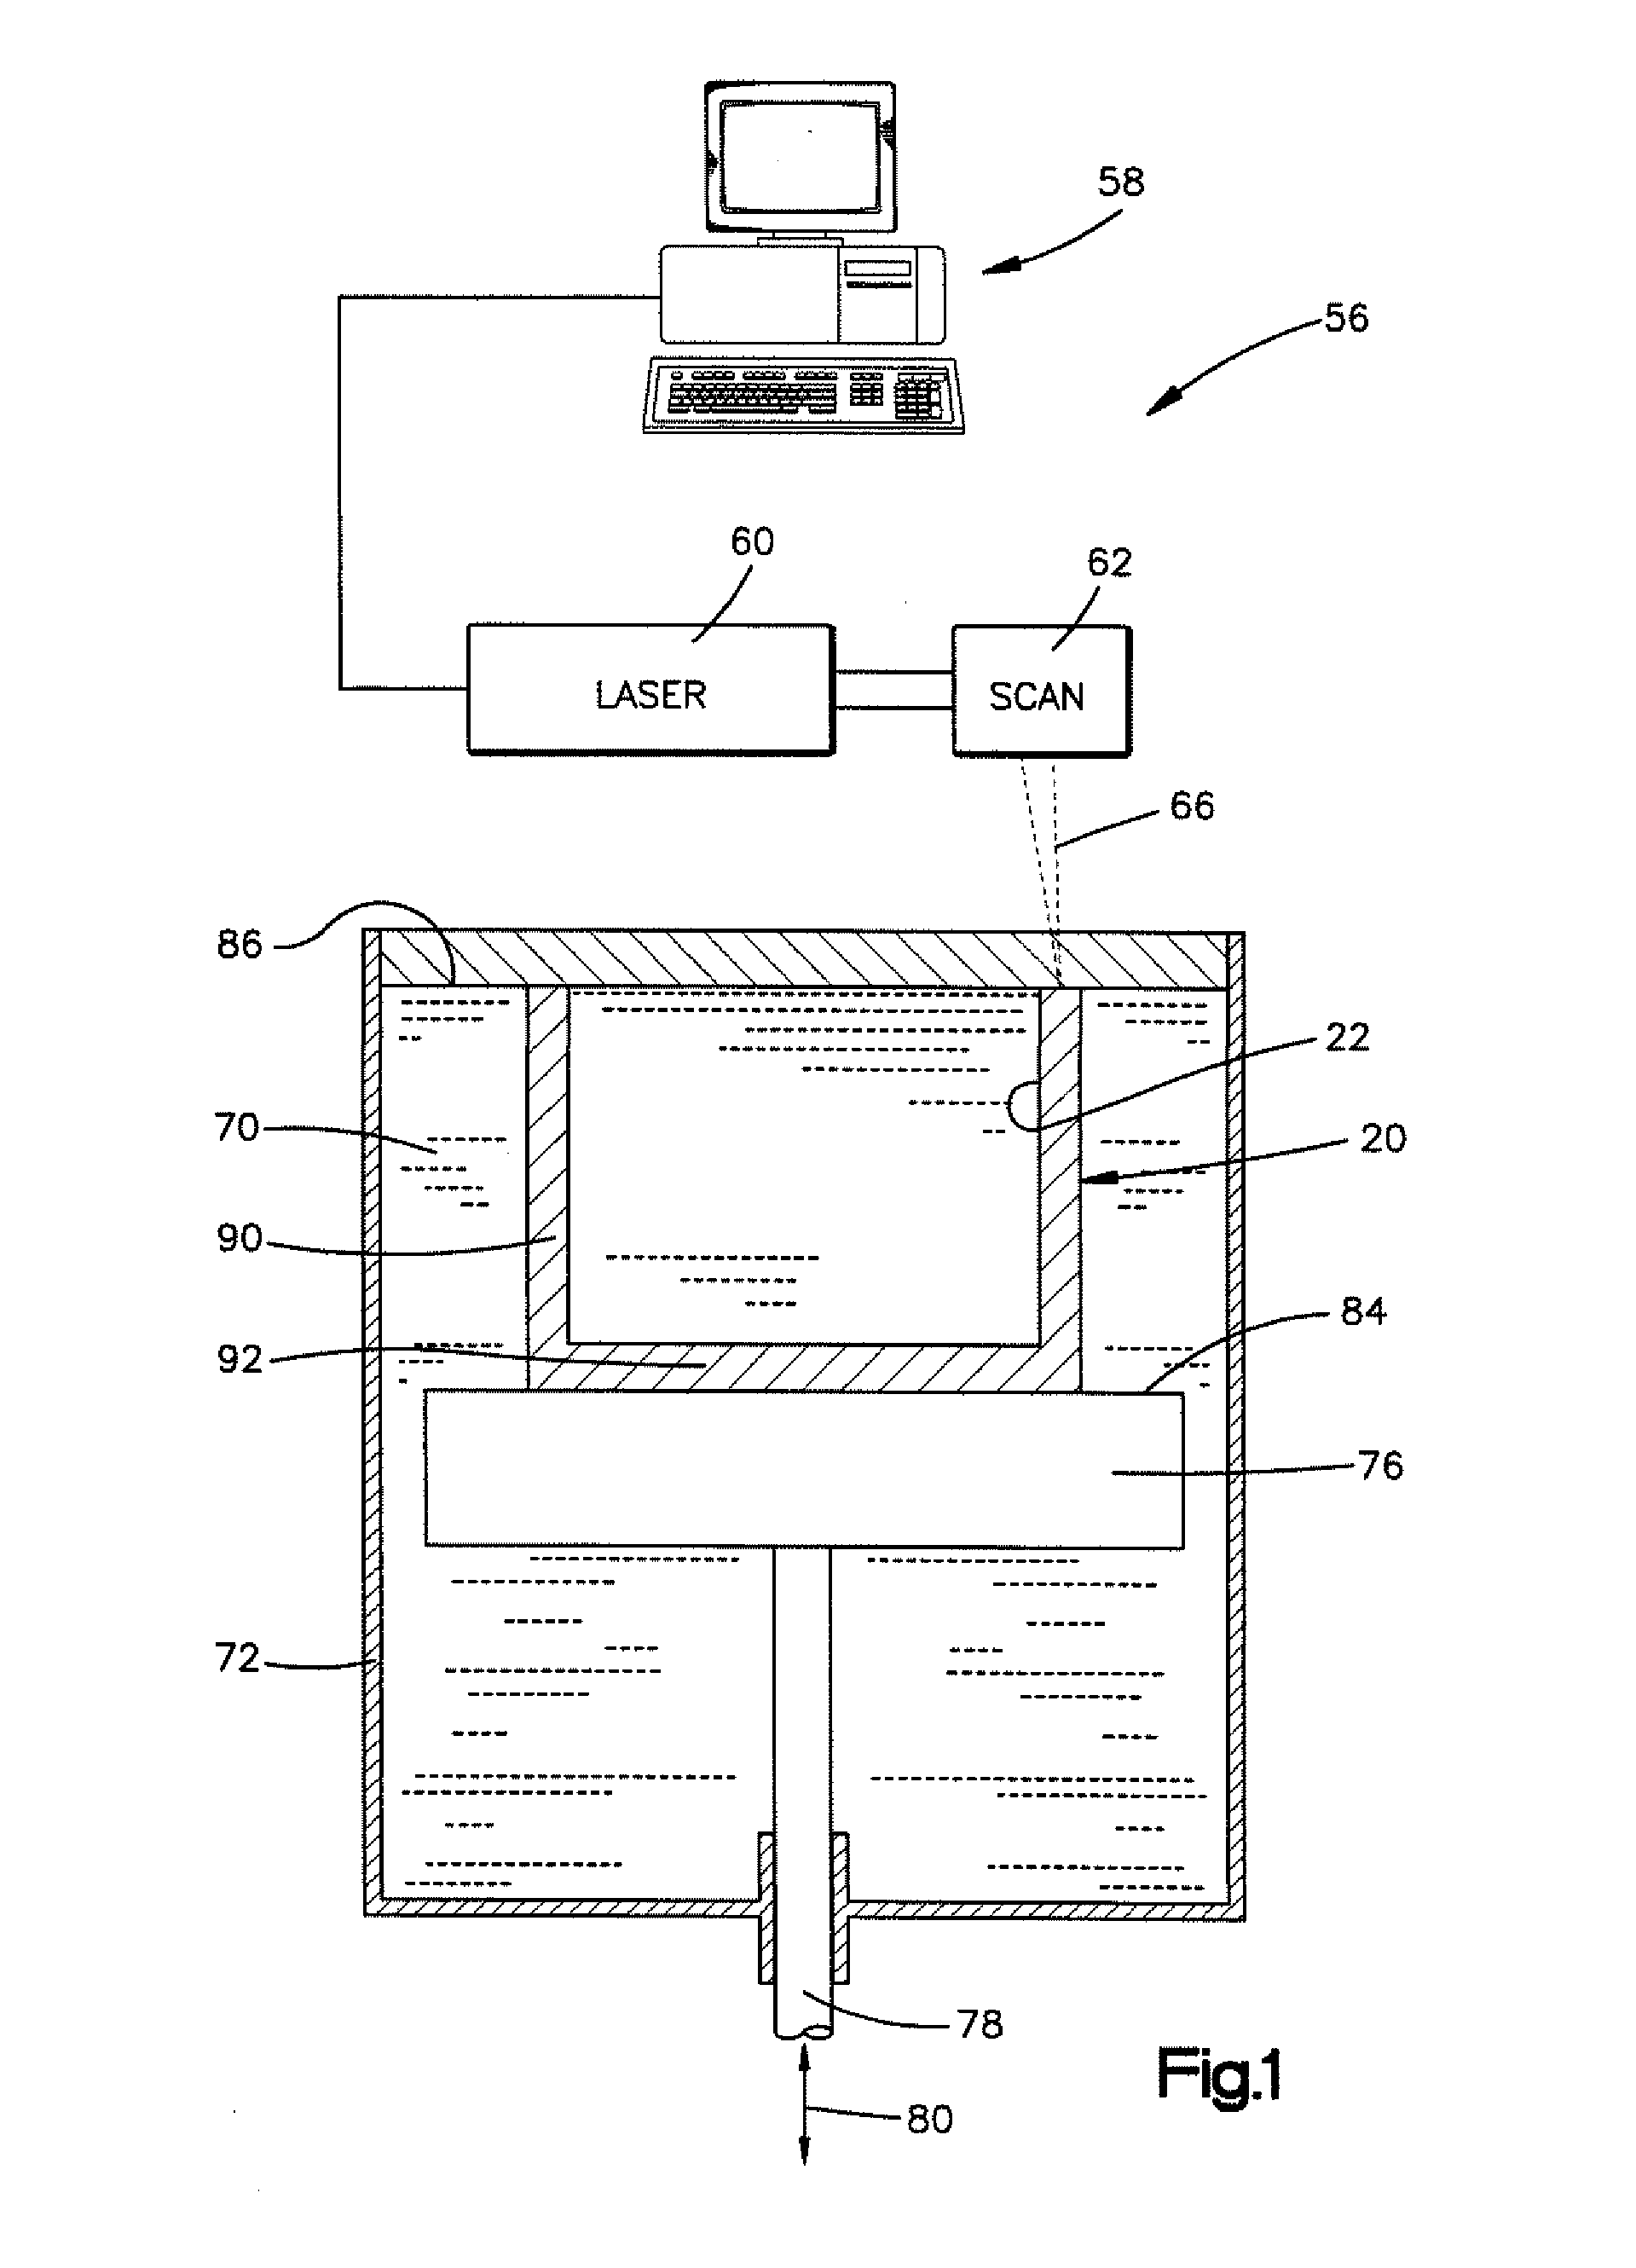 Method of forming a cast metal article